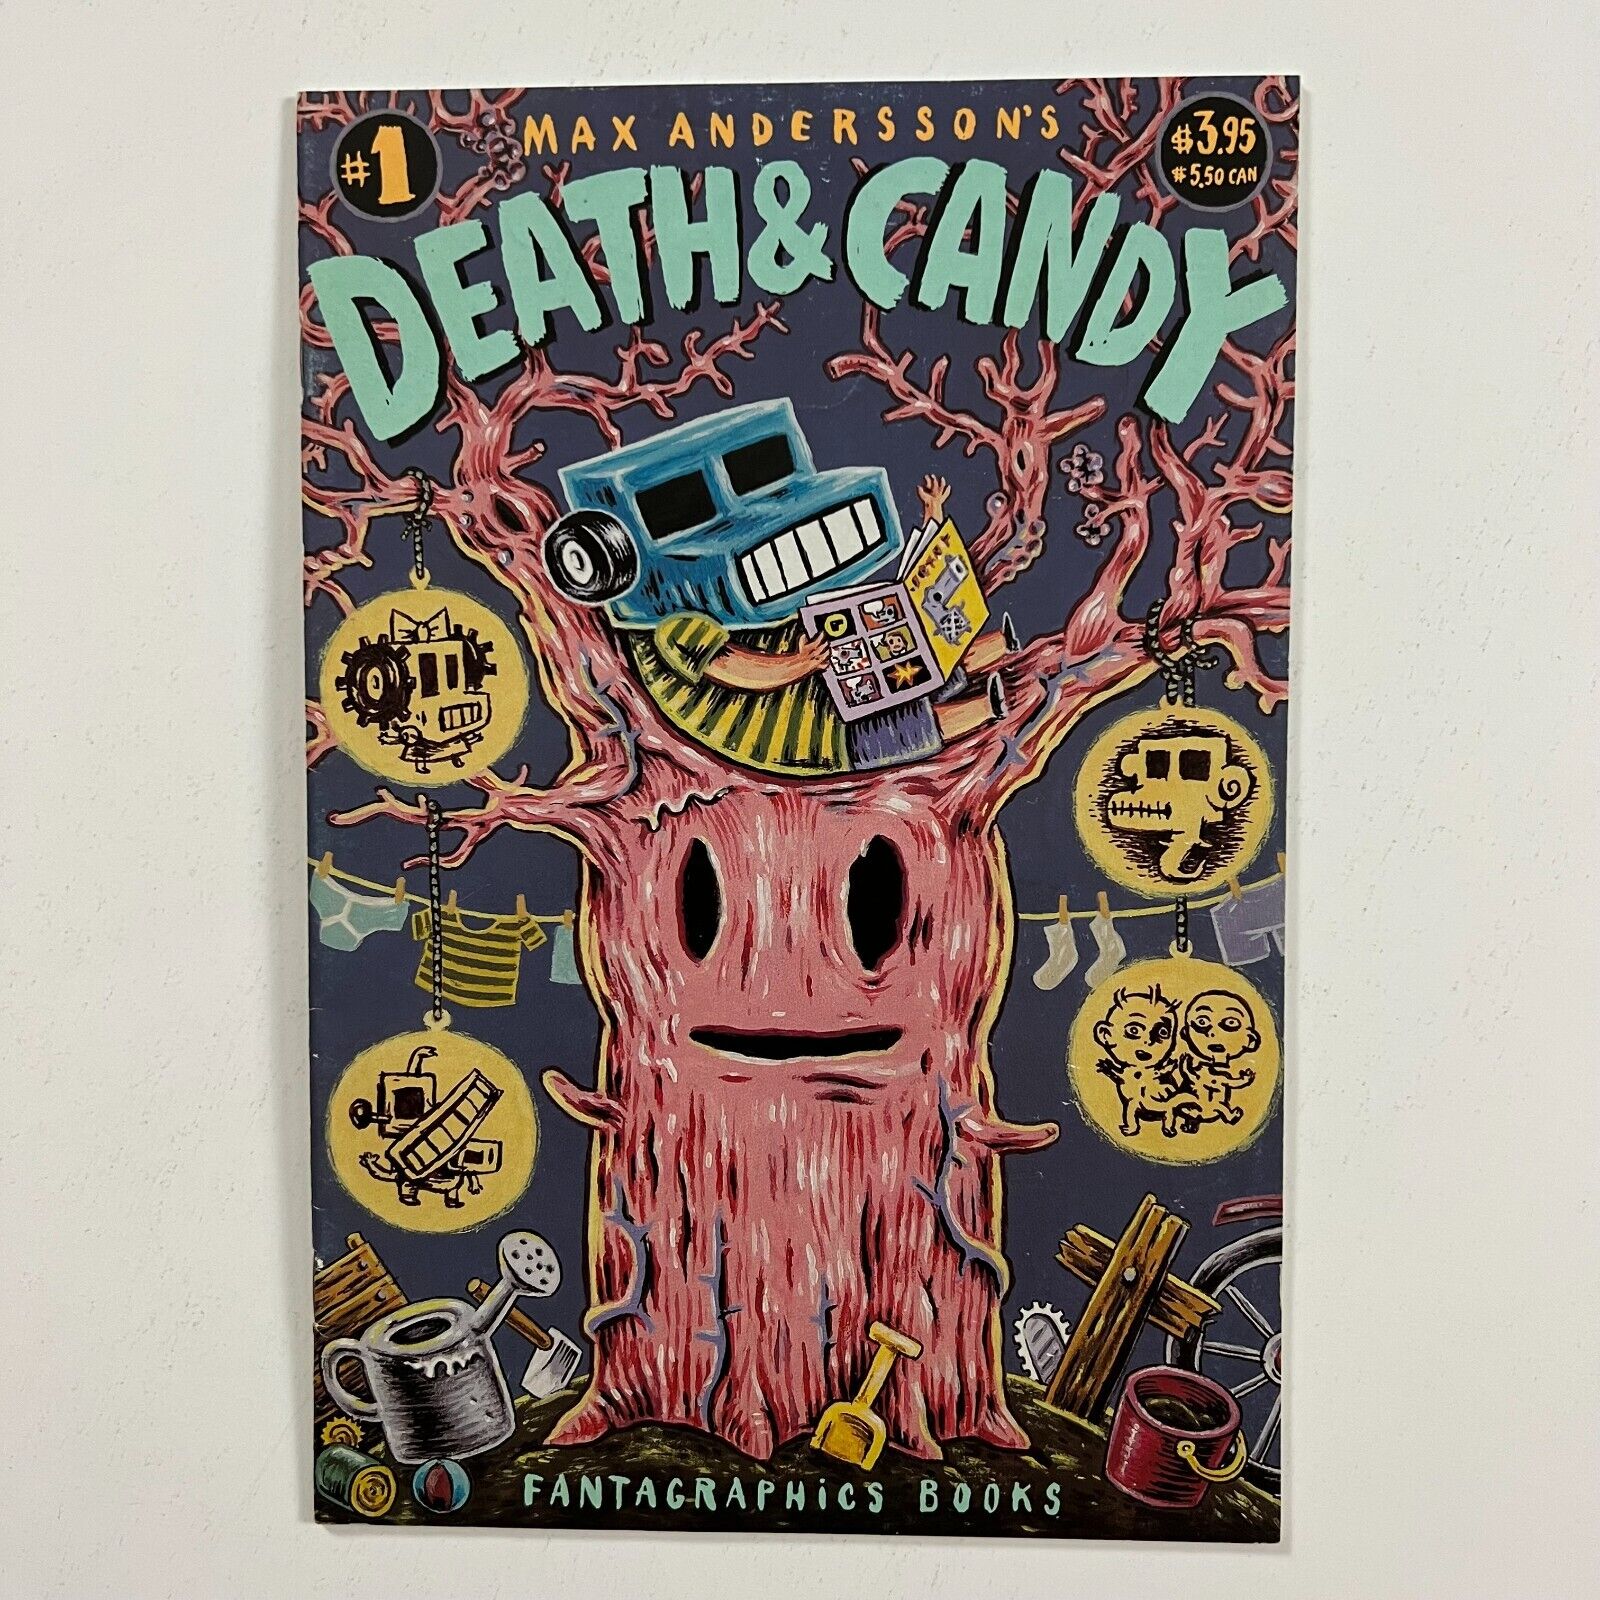 DEATH & CANDY 1 MAX ANDERSSON (1998, FANTAGRAPHICS)